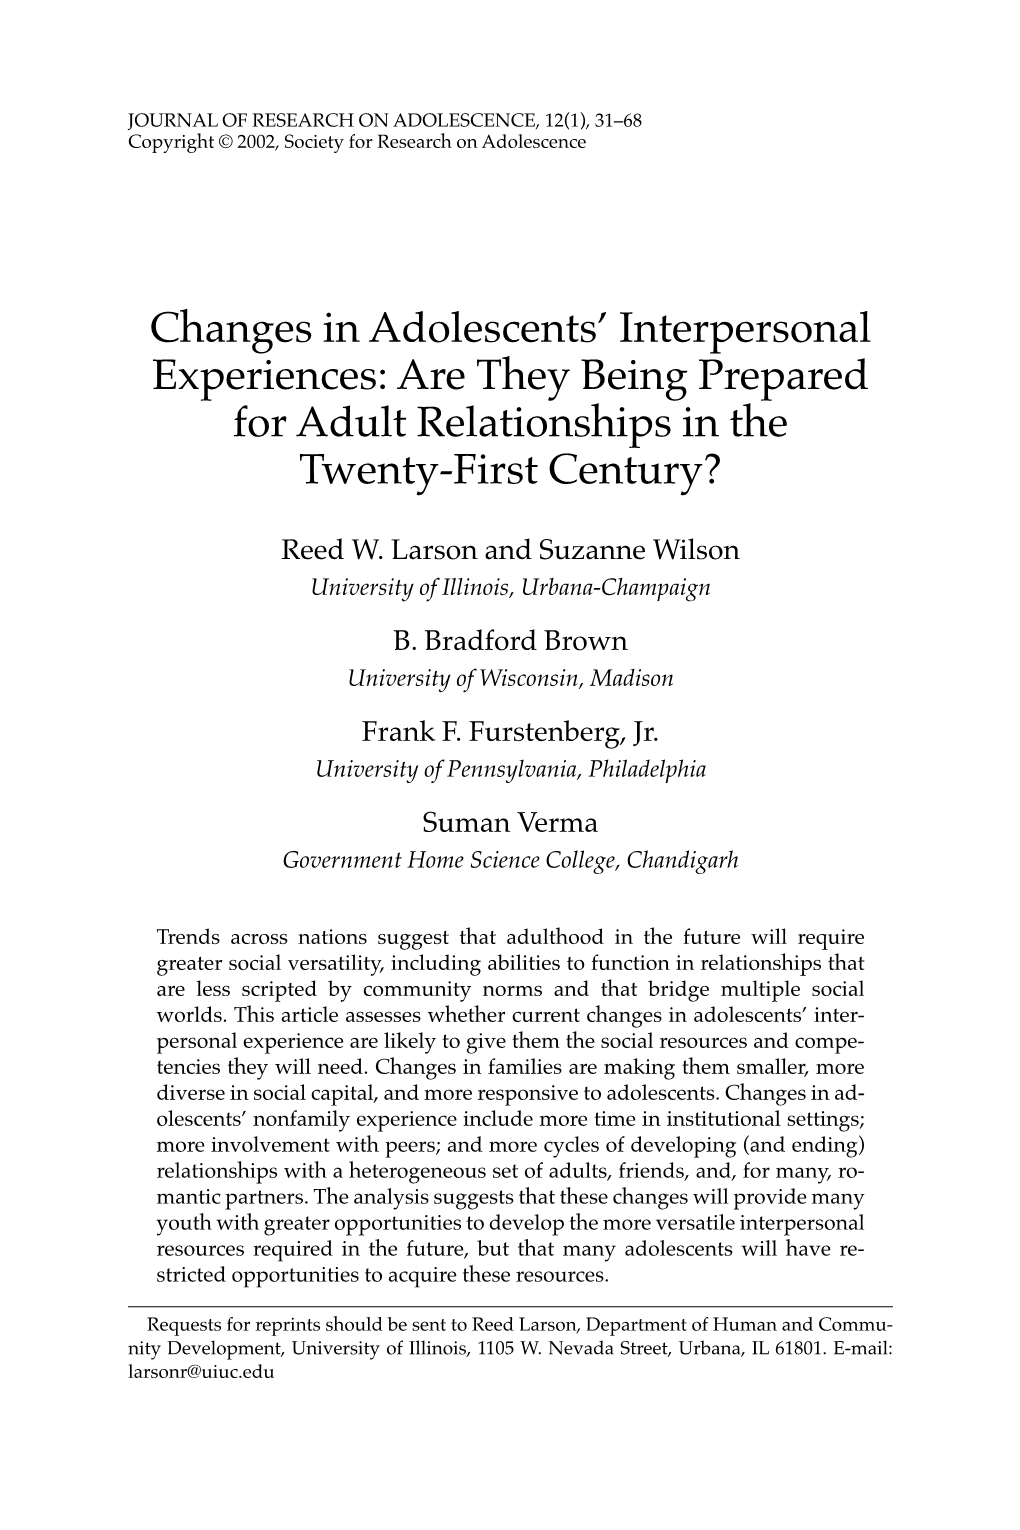 Changes in Adolescents' Interpersonal